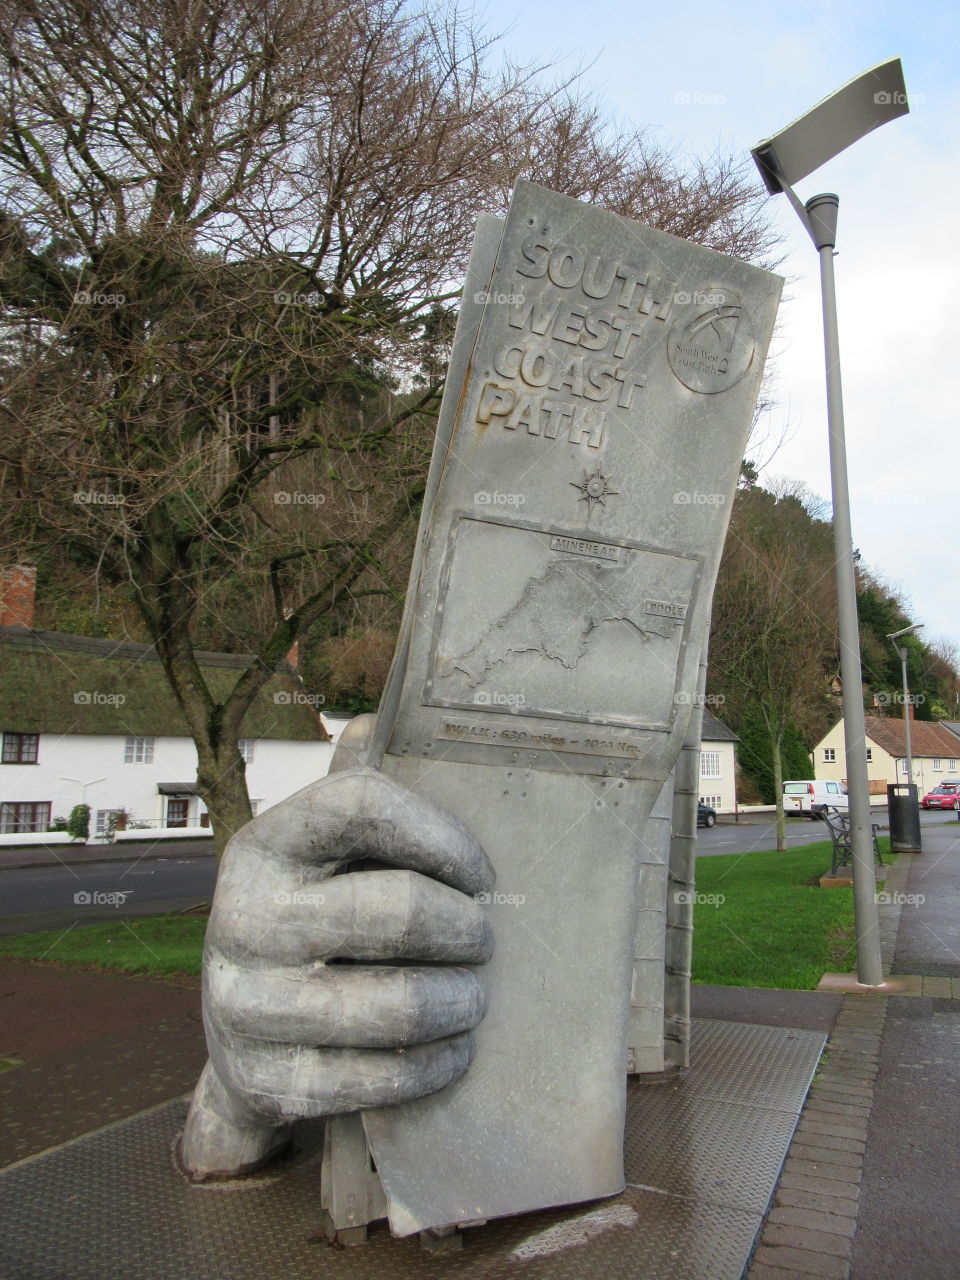 Minehead seafront A hand sculpture holding a giant sign